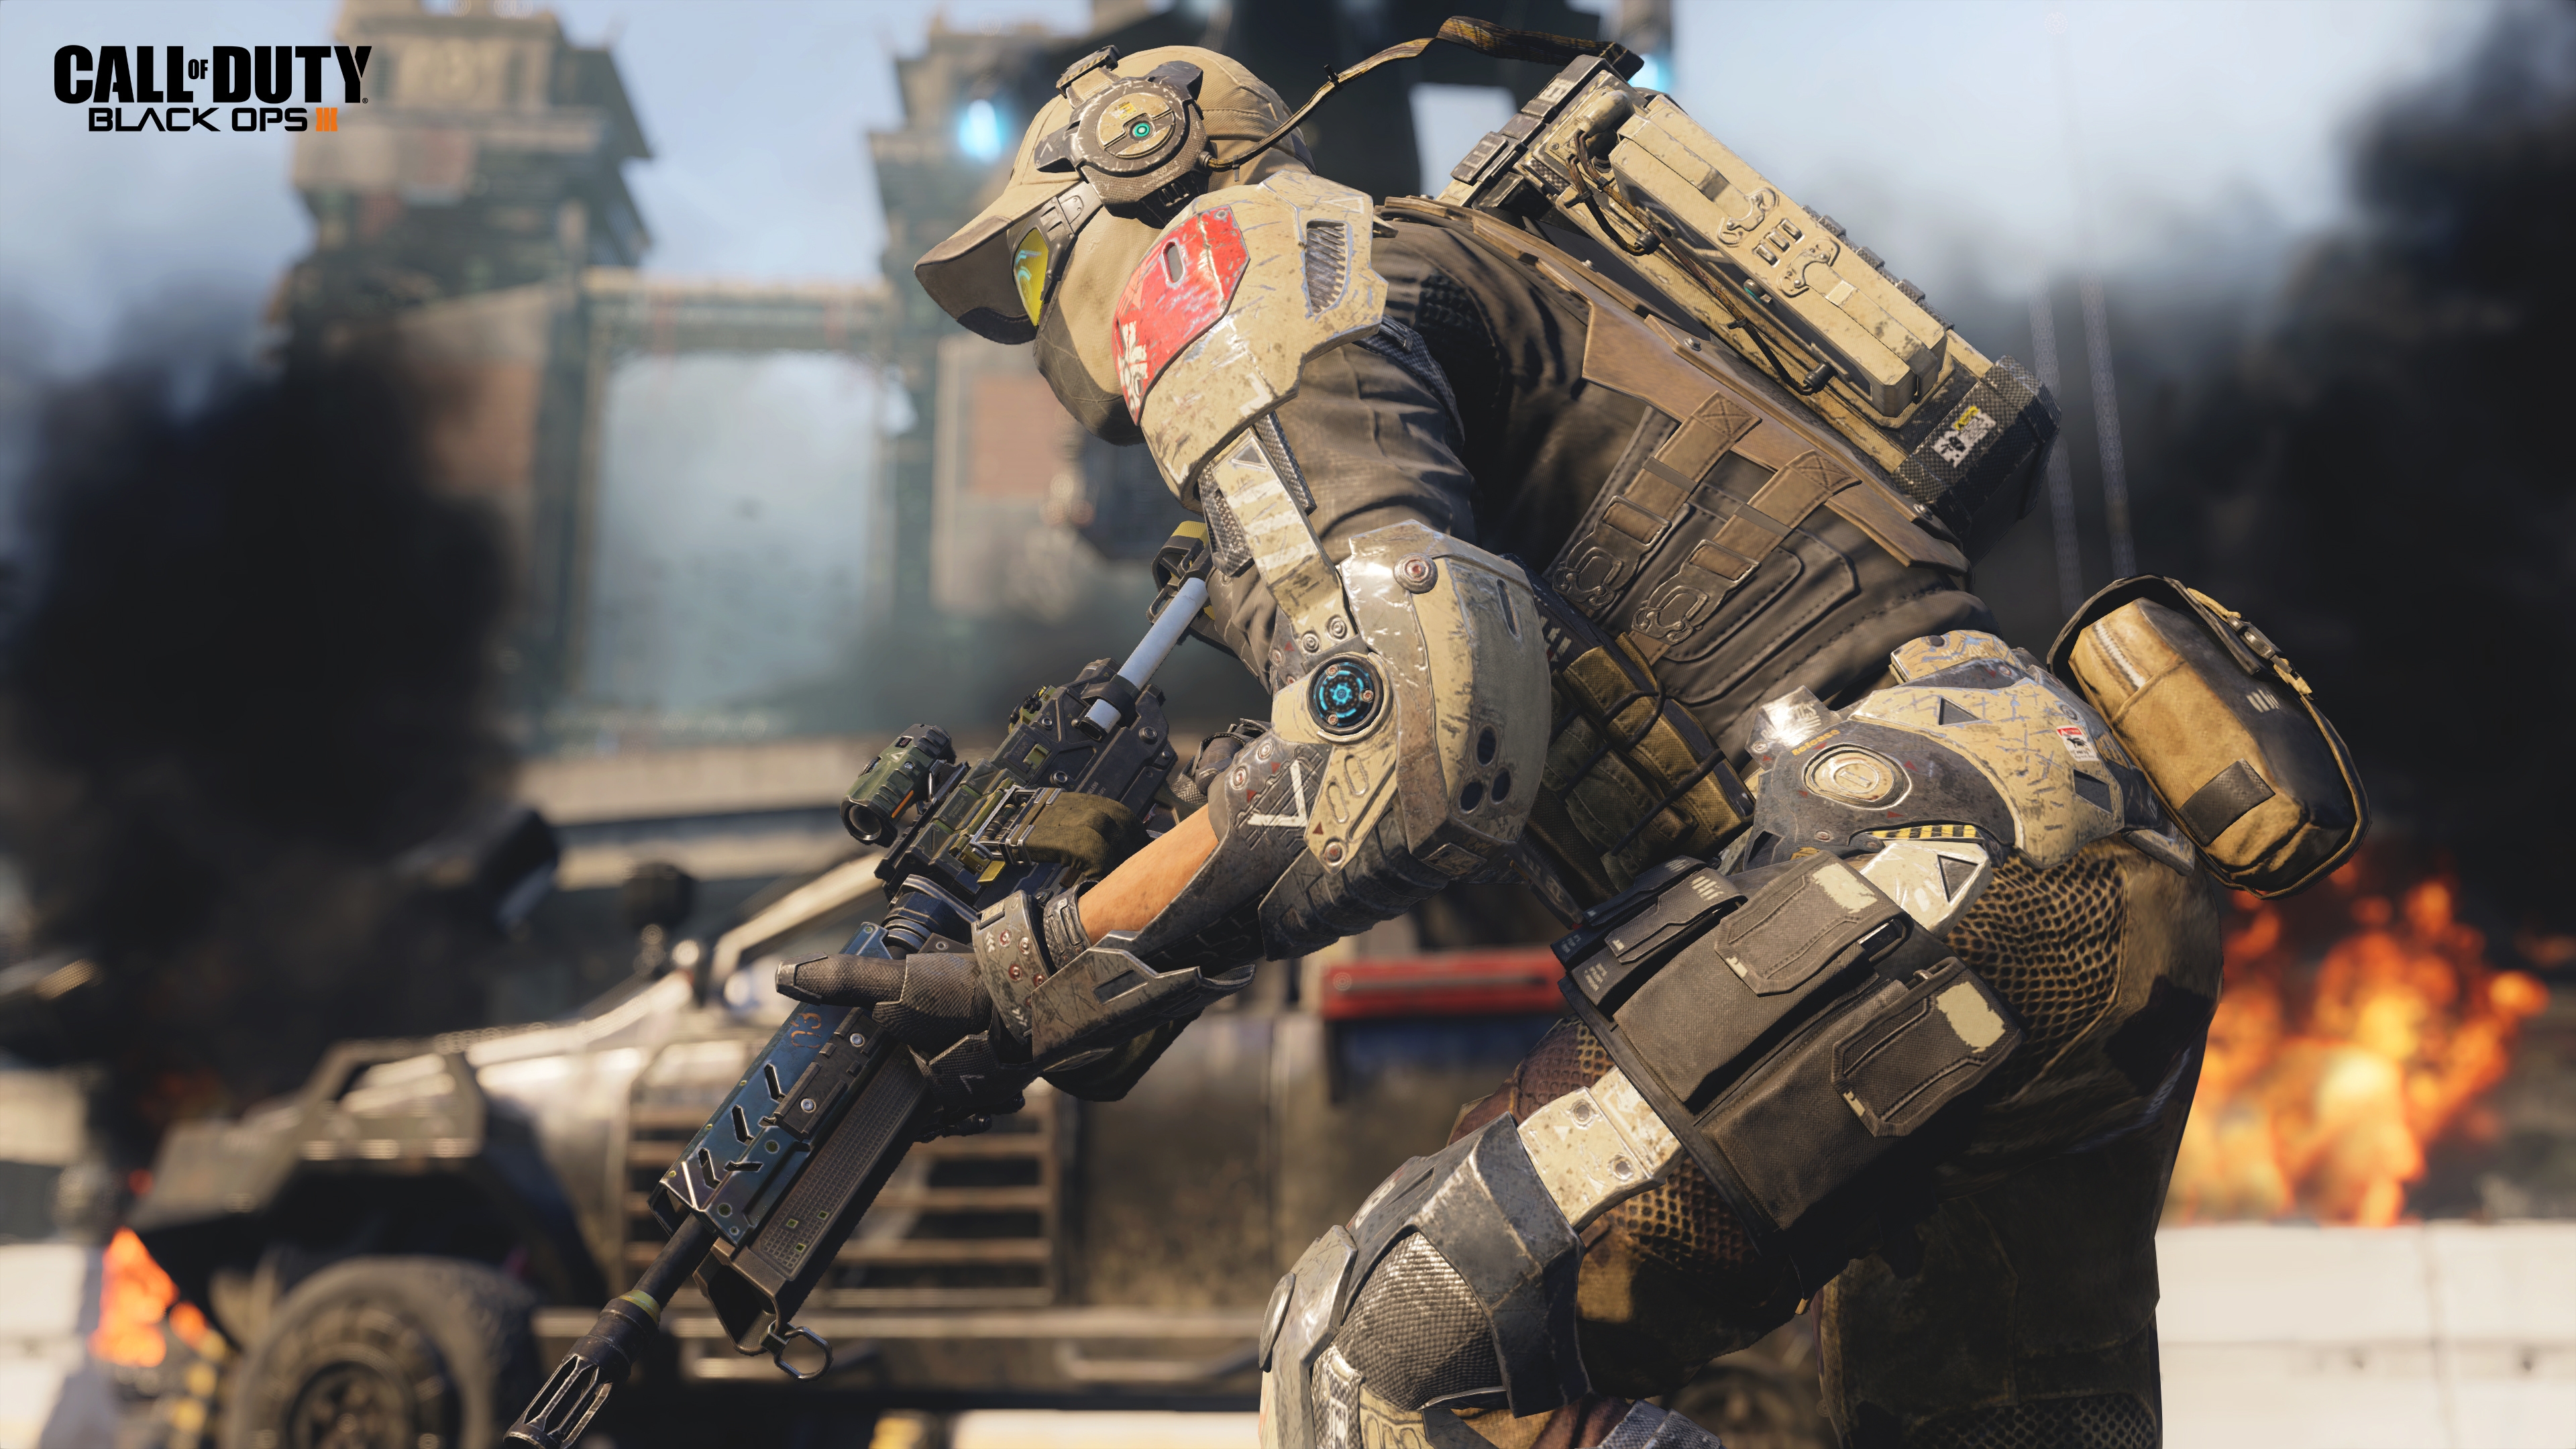 Call of Duty Black Ops III for 3840 x 2160 Ultra HD resolution